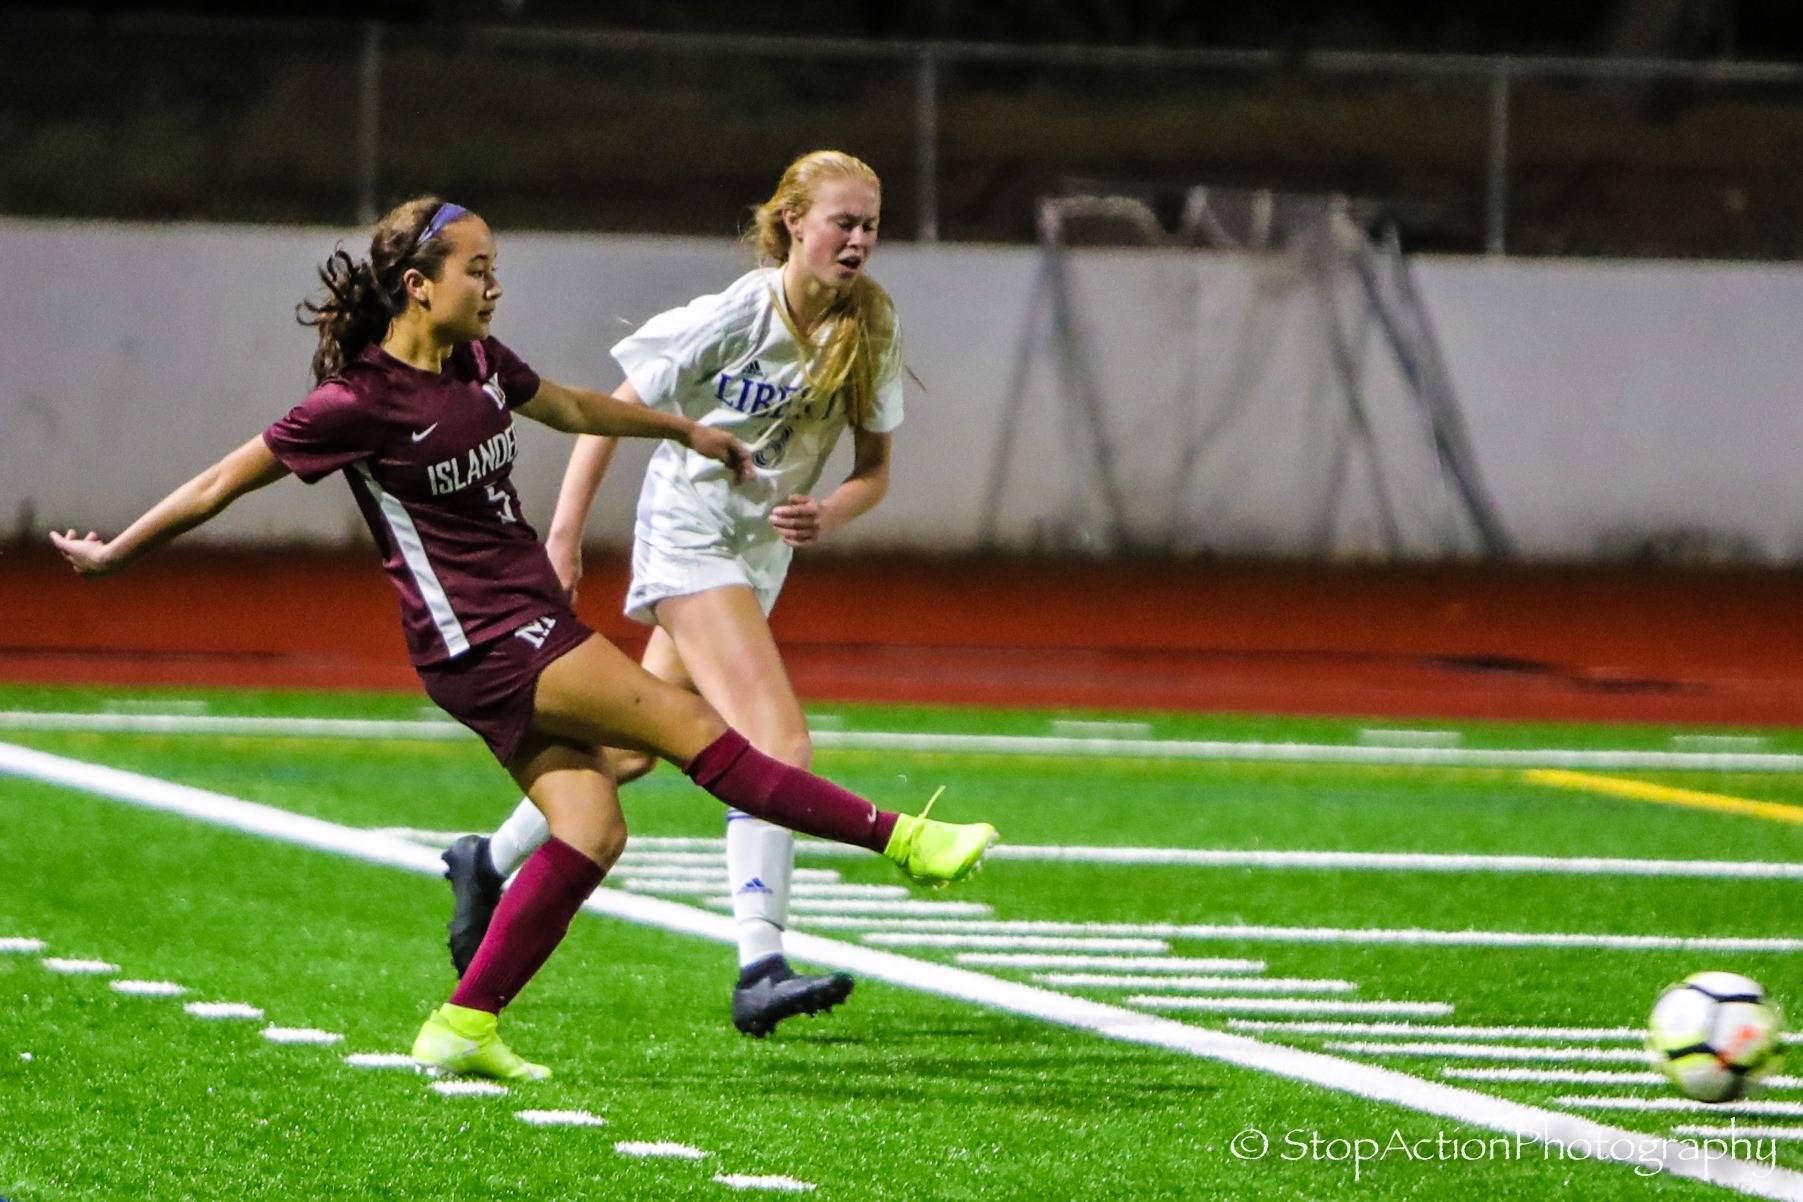 In this 2019 photo, Mercer Island’s Emily Yang, left, takes a shot on goal against Liberty. Photo courtesy of Don Borin/ StopActionPhotography